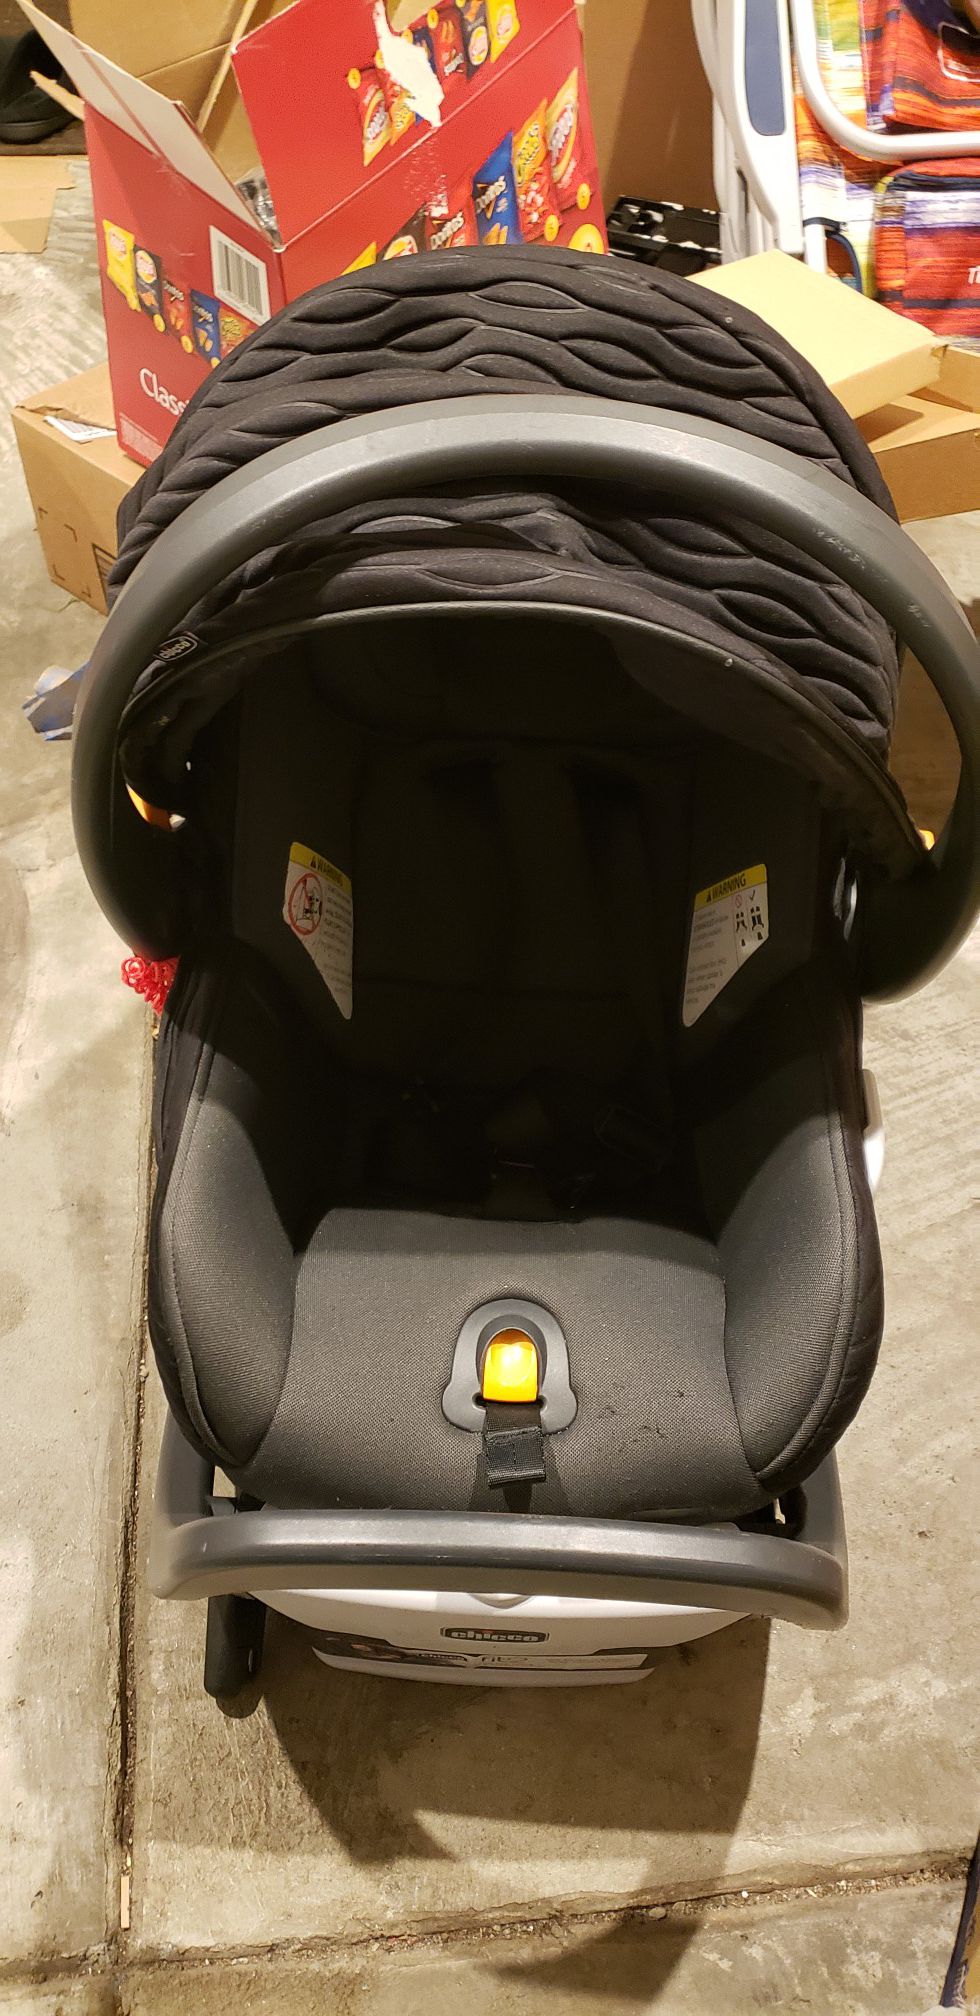 2in1 infant car seat with base expire 2023